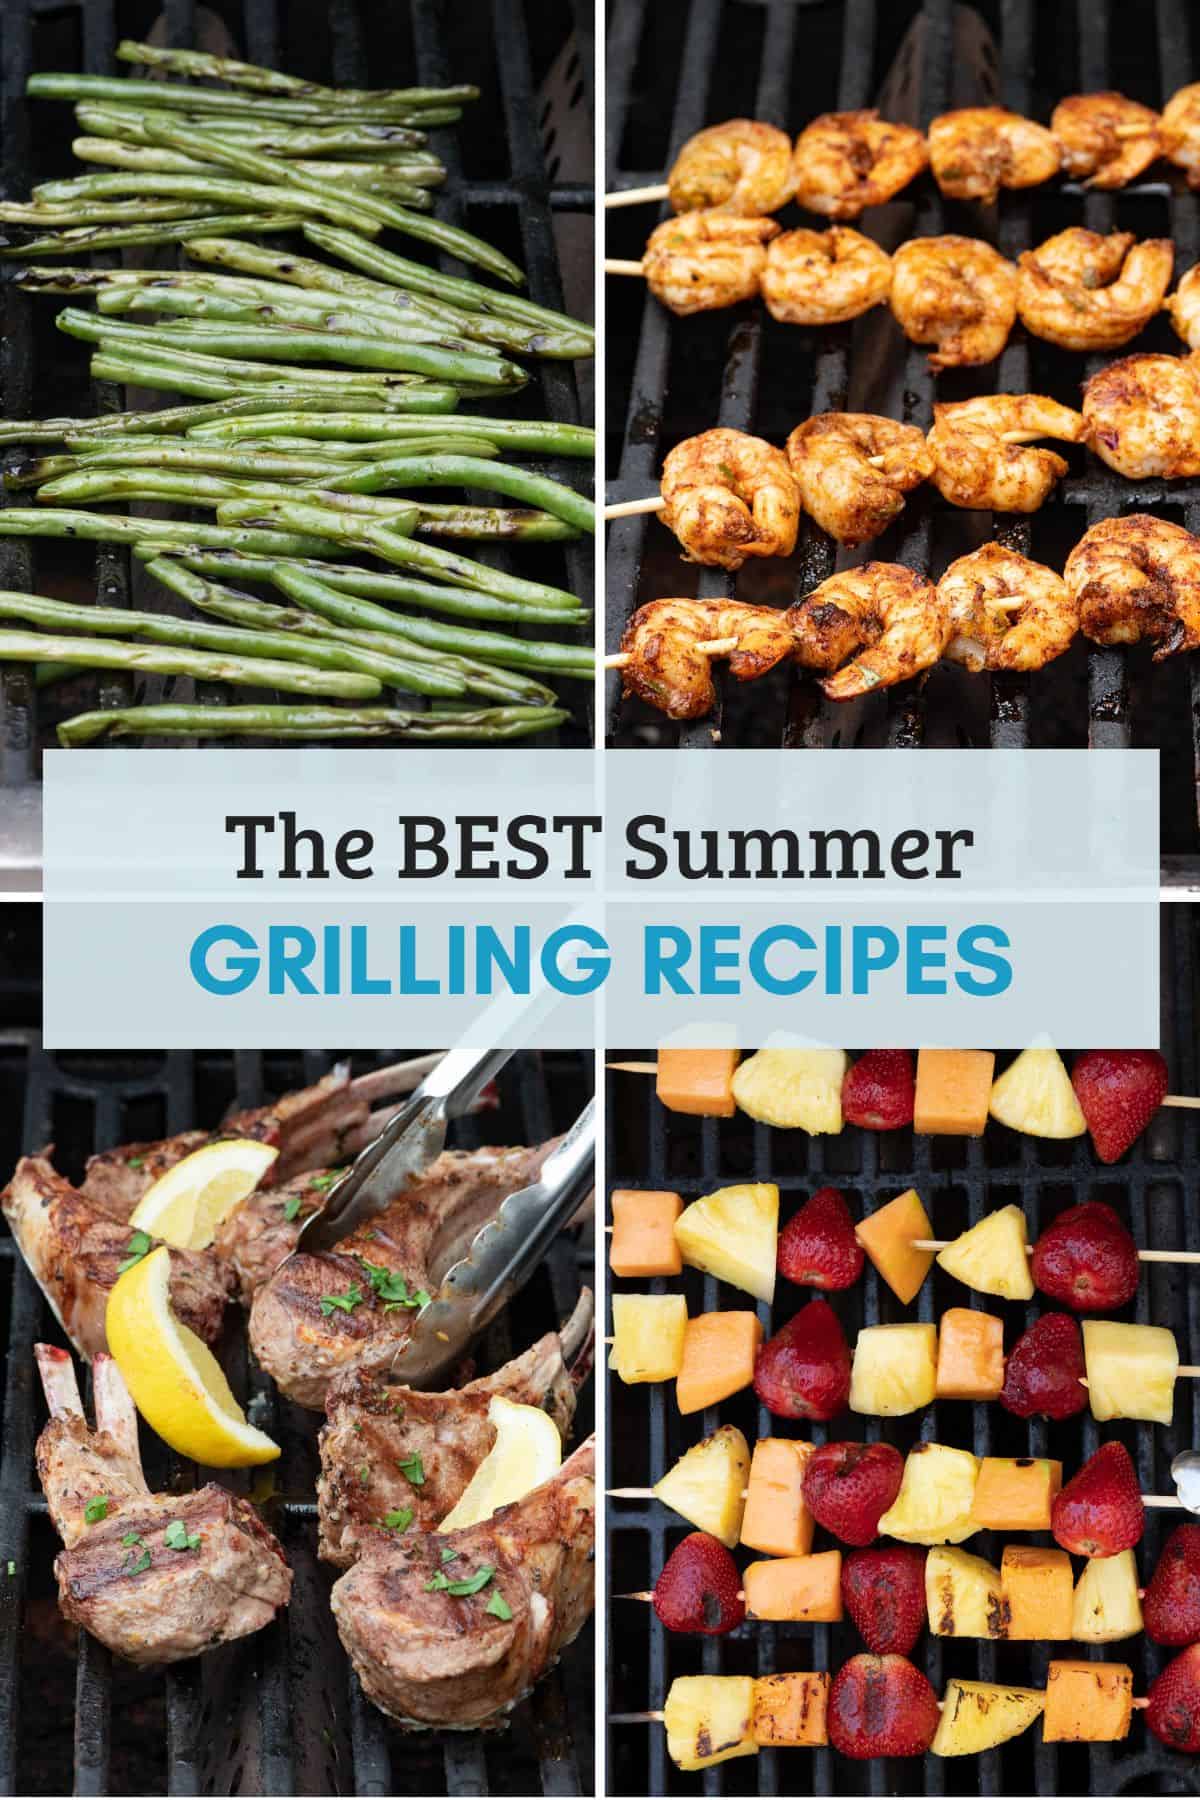 Best Meat Thermometers for Summer Grilling and Beyond